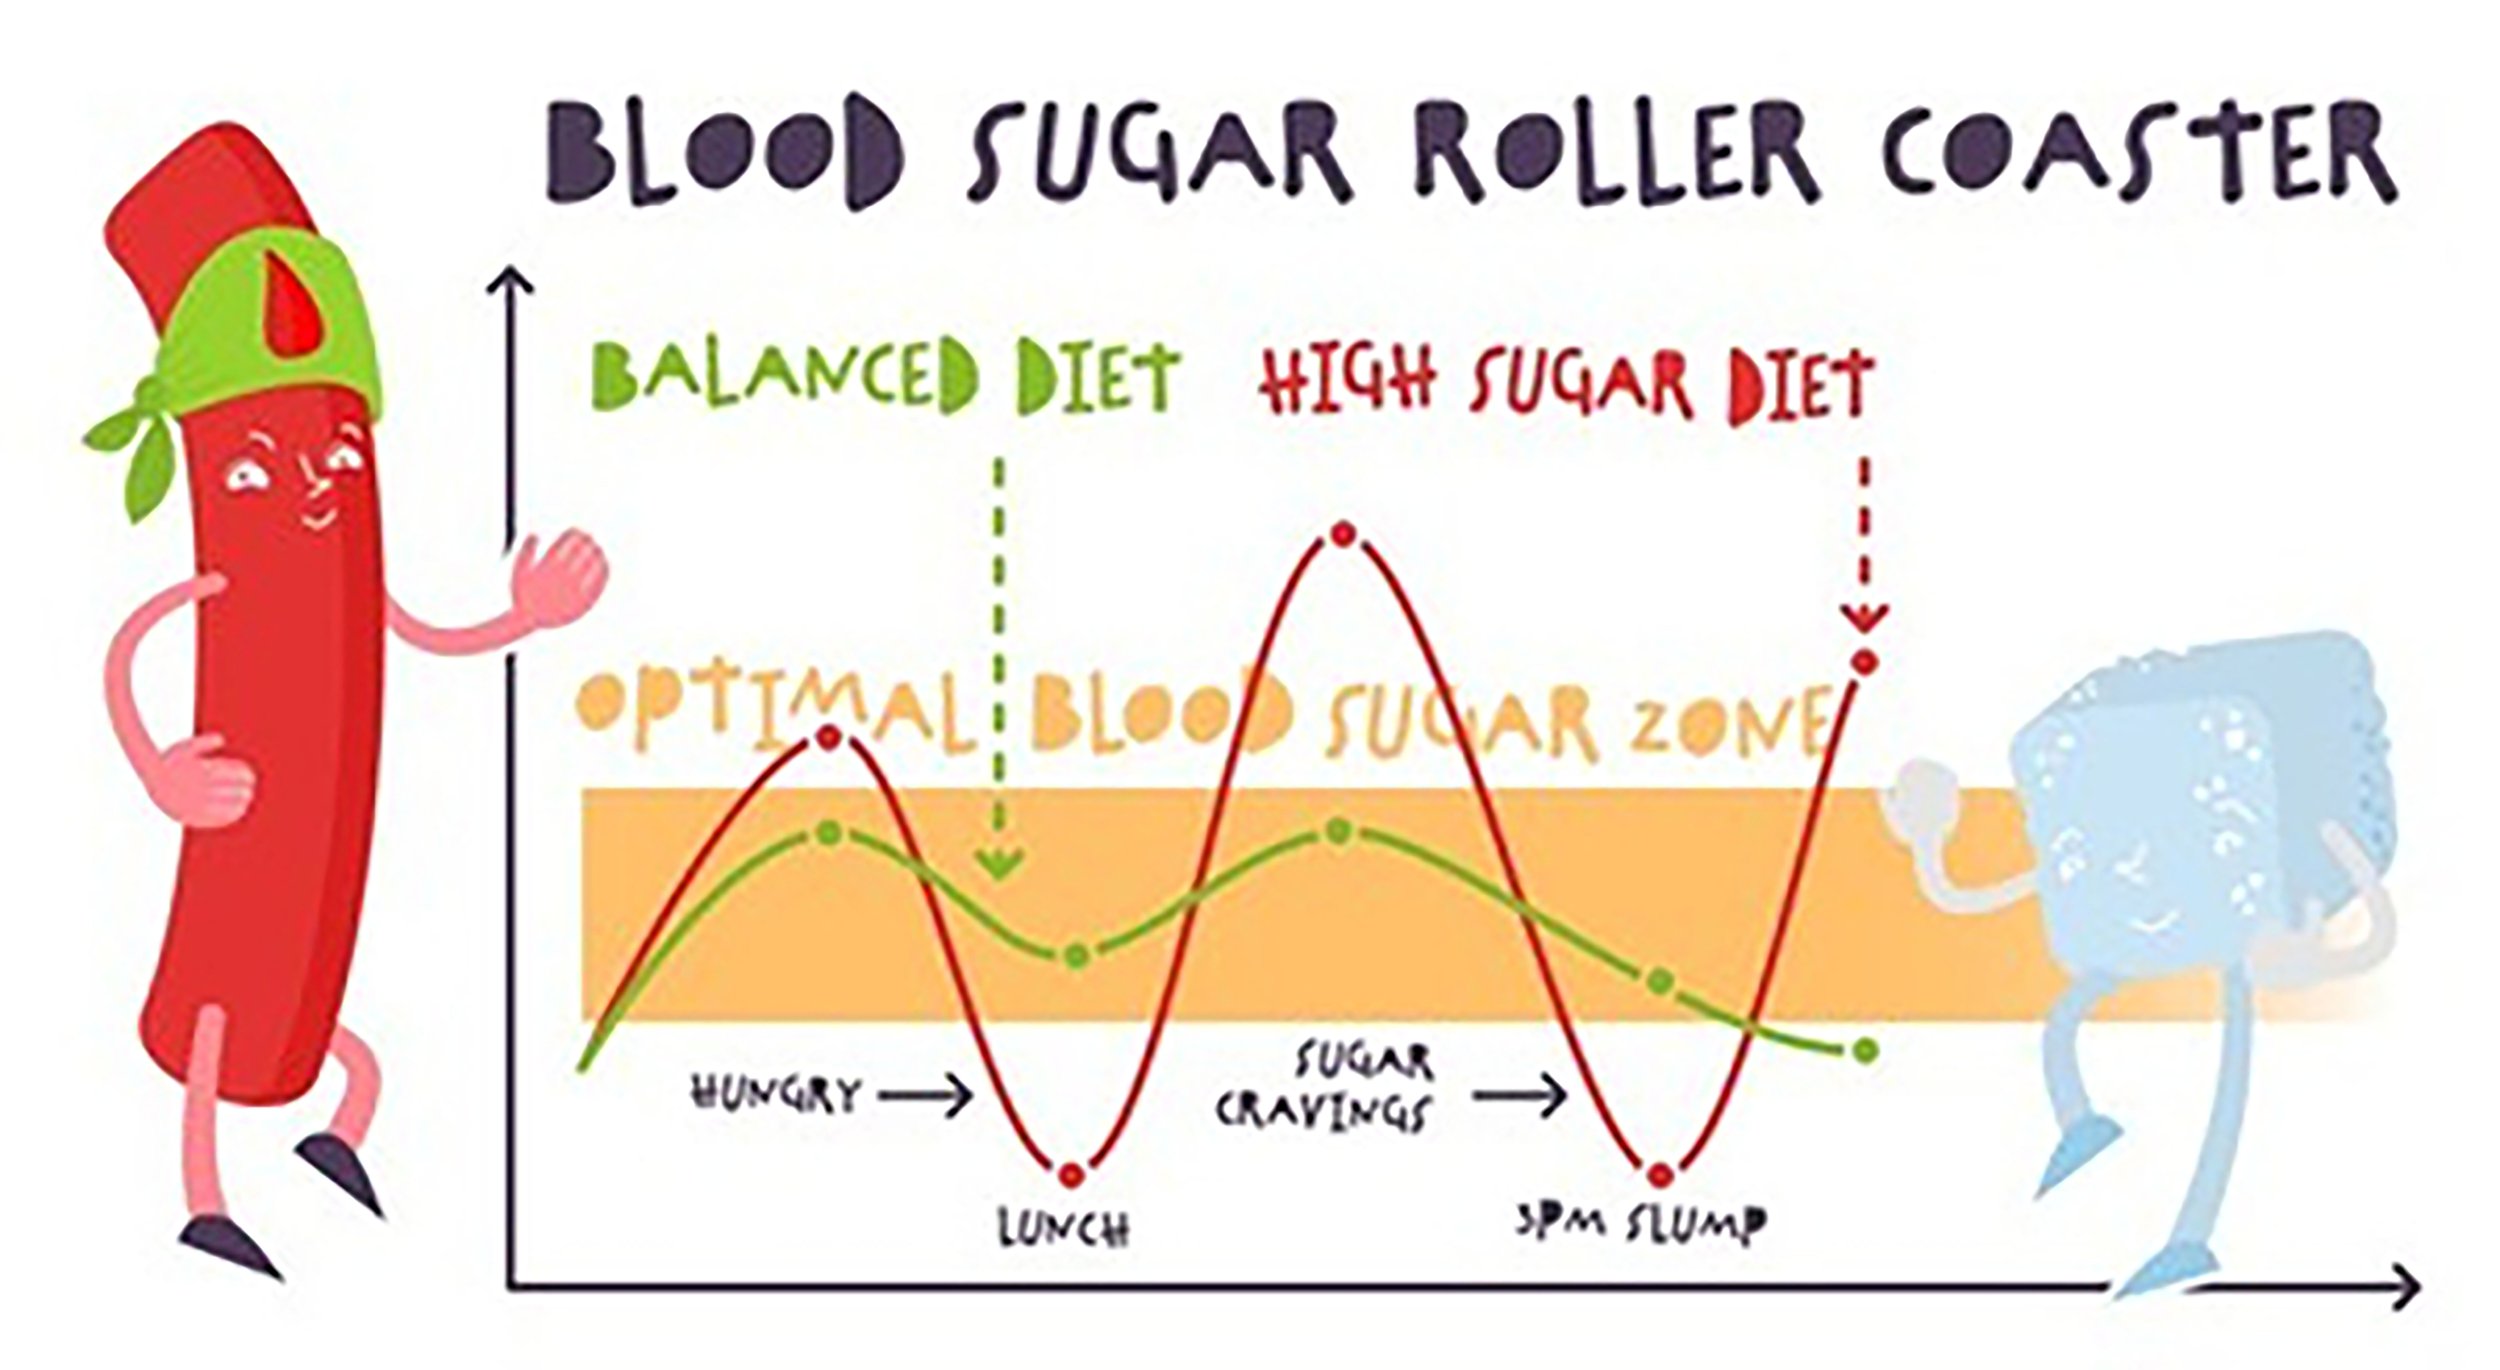 Lifestyle changes for stable blood sugar